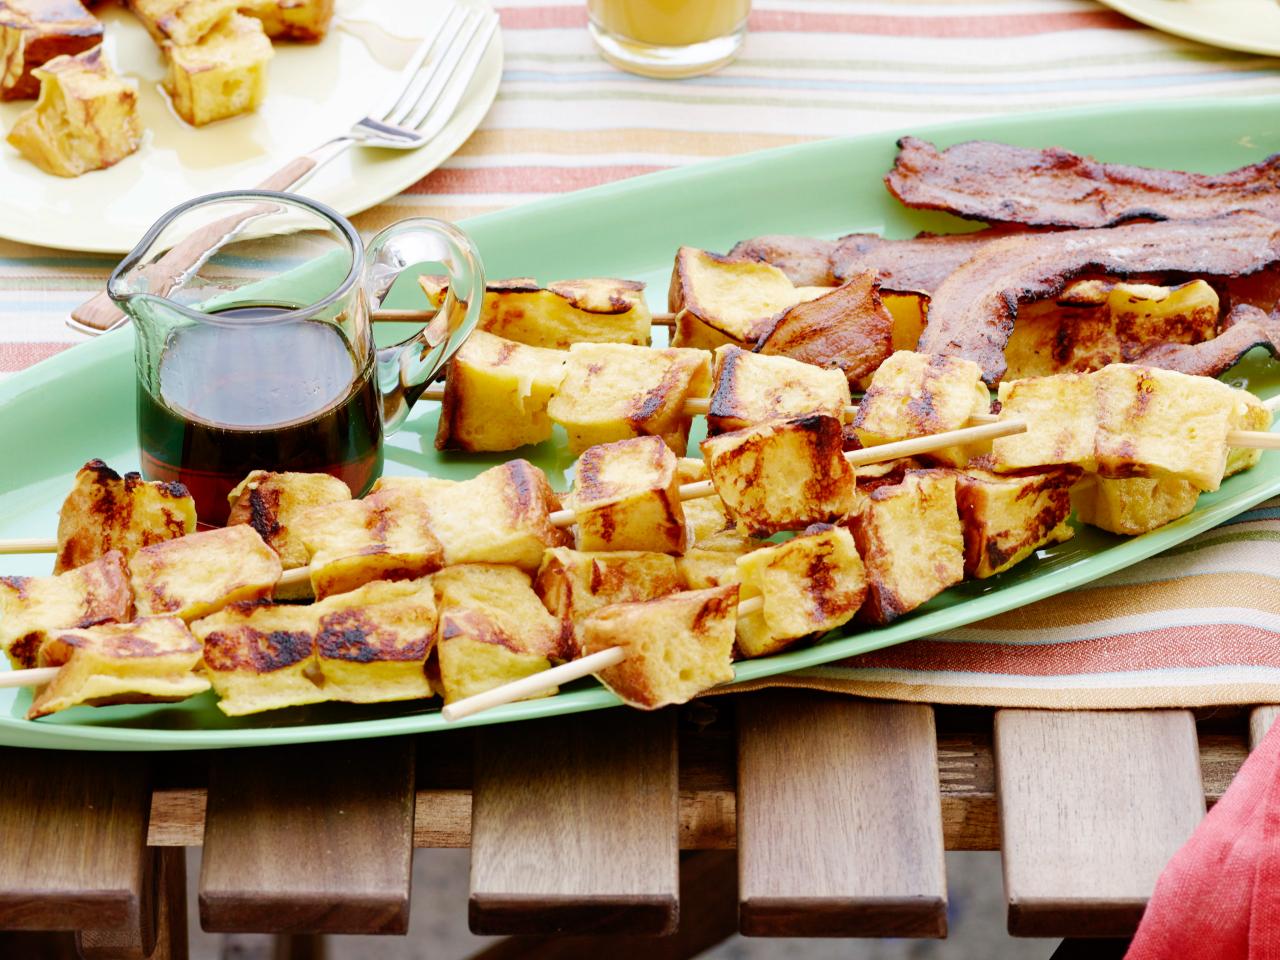 3 Grilled Breakfast Recipes